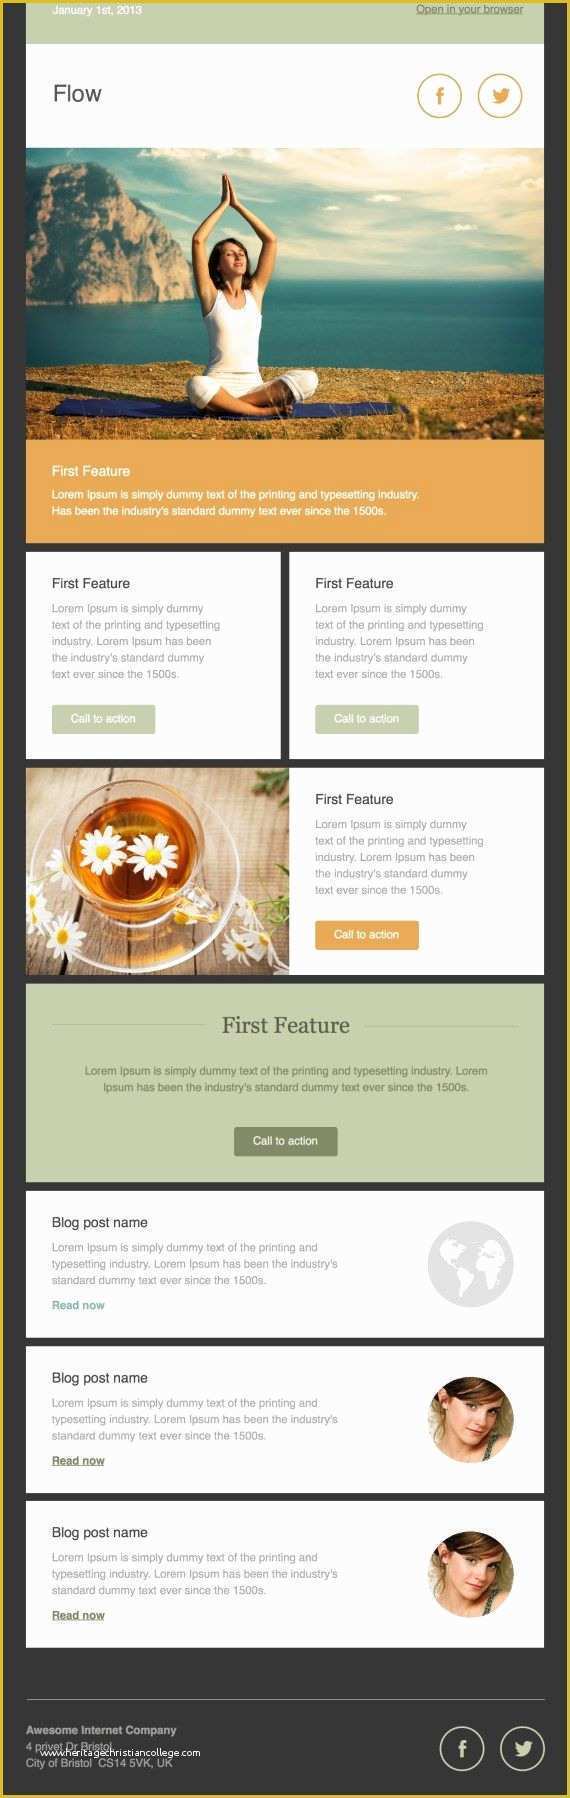 Free Marketo Email Templates Of Best 25 School Newsletter Template Ideas On Pinterest